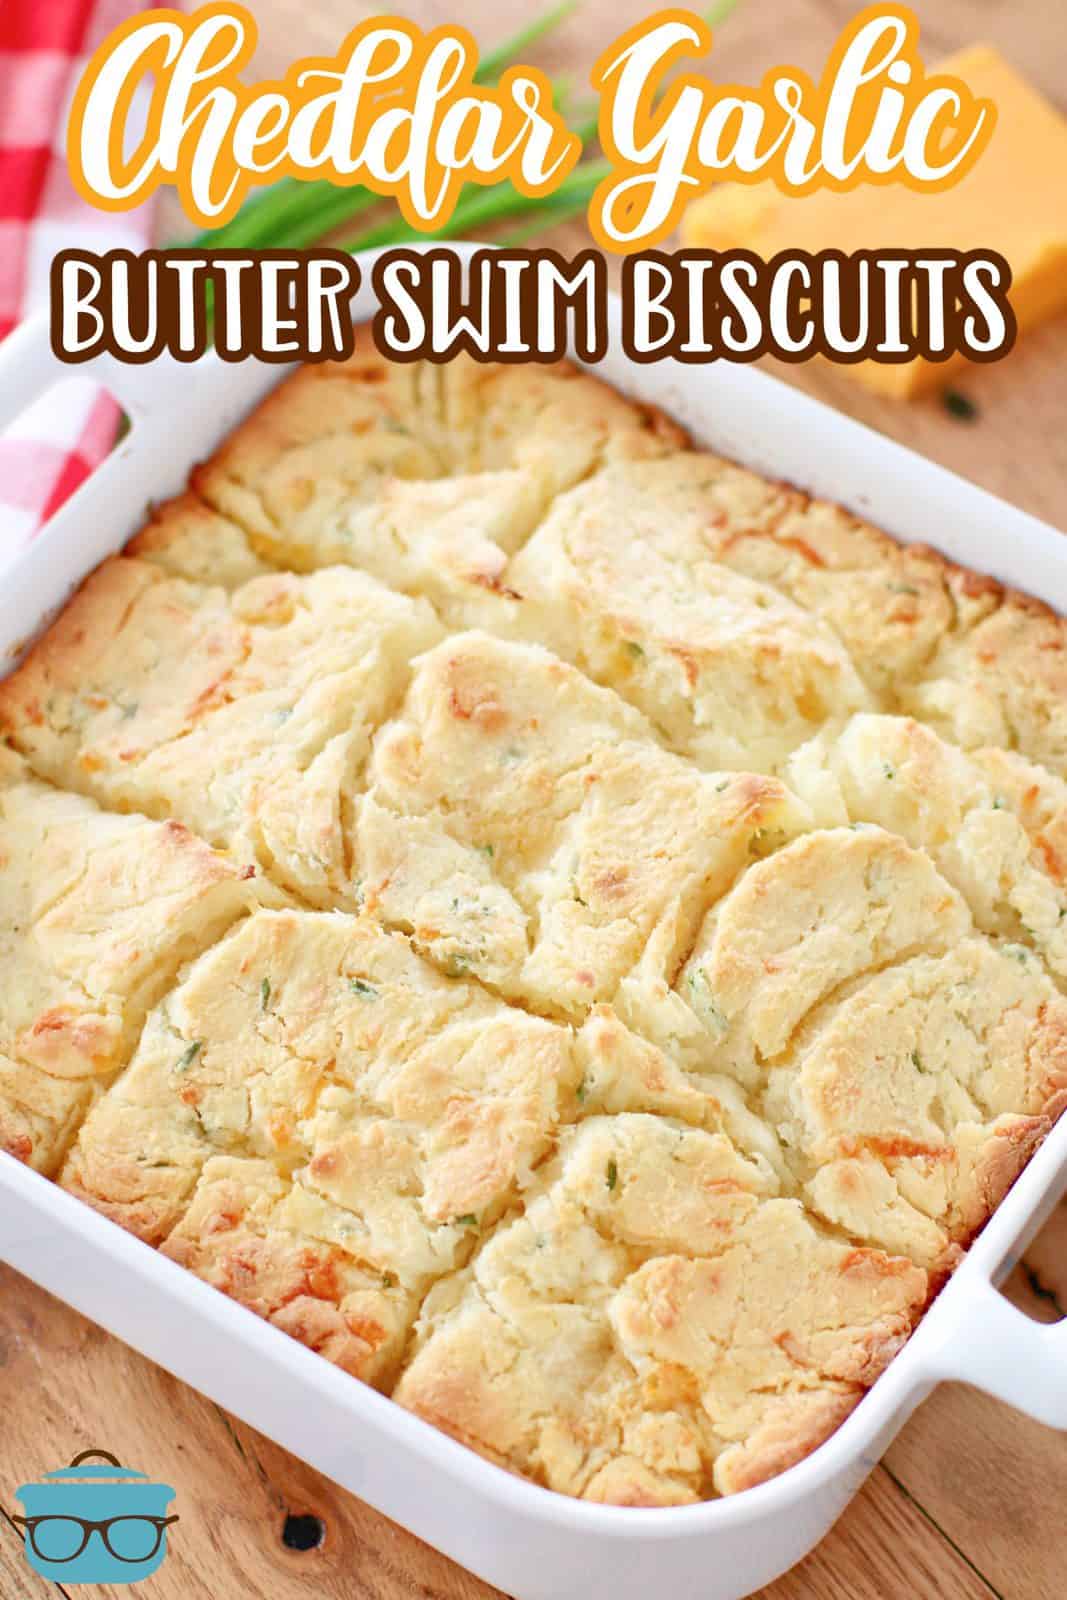 fully baked Cheddar Garlic Butter Dip Biscuits shown in a square white baking dish on a wood surface.